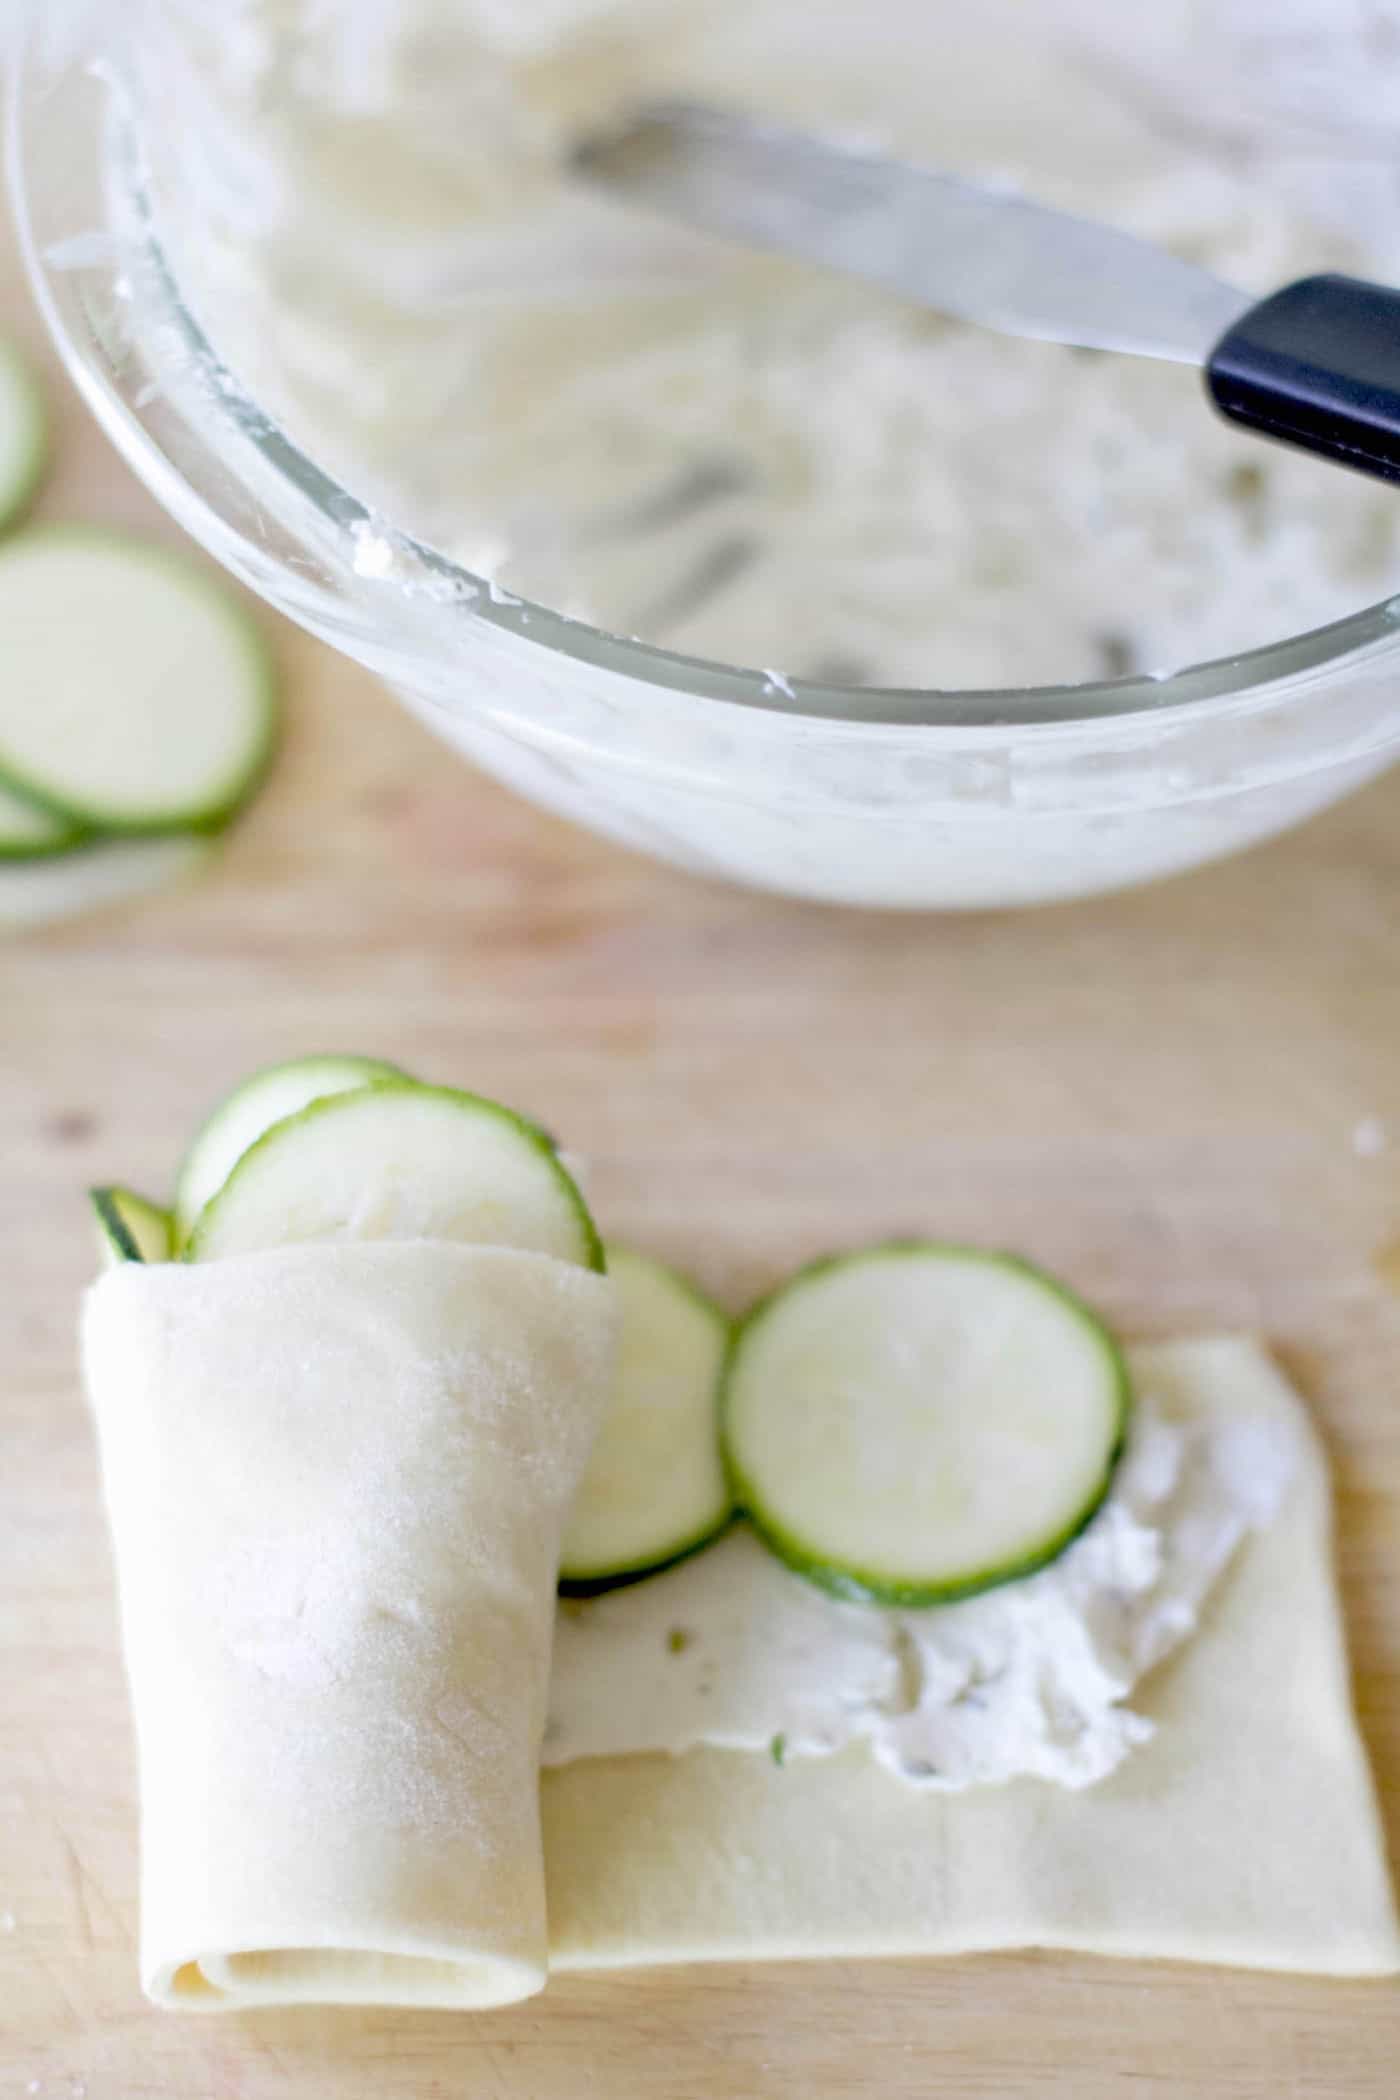 rolling up the puff pastry dough with the cheese and zucchini